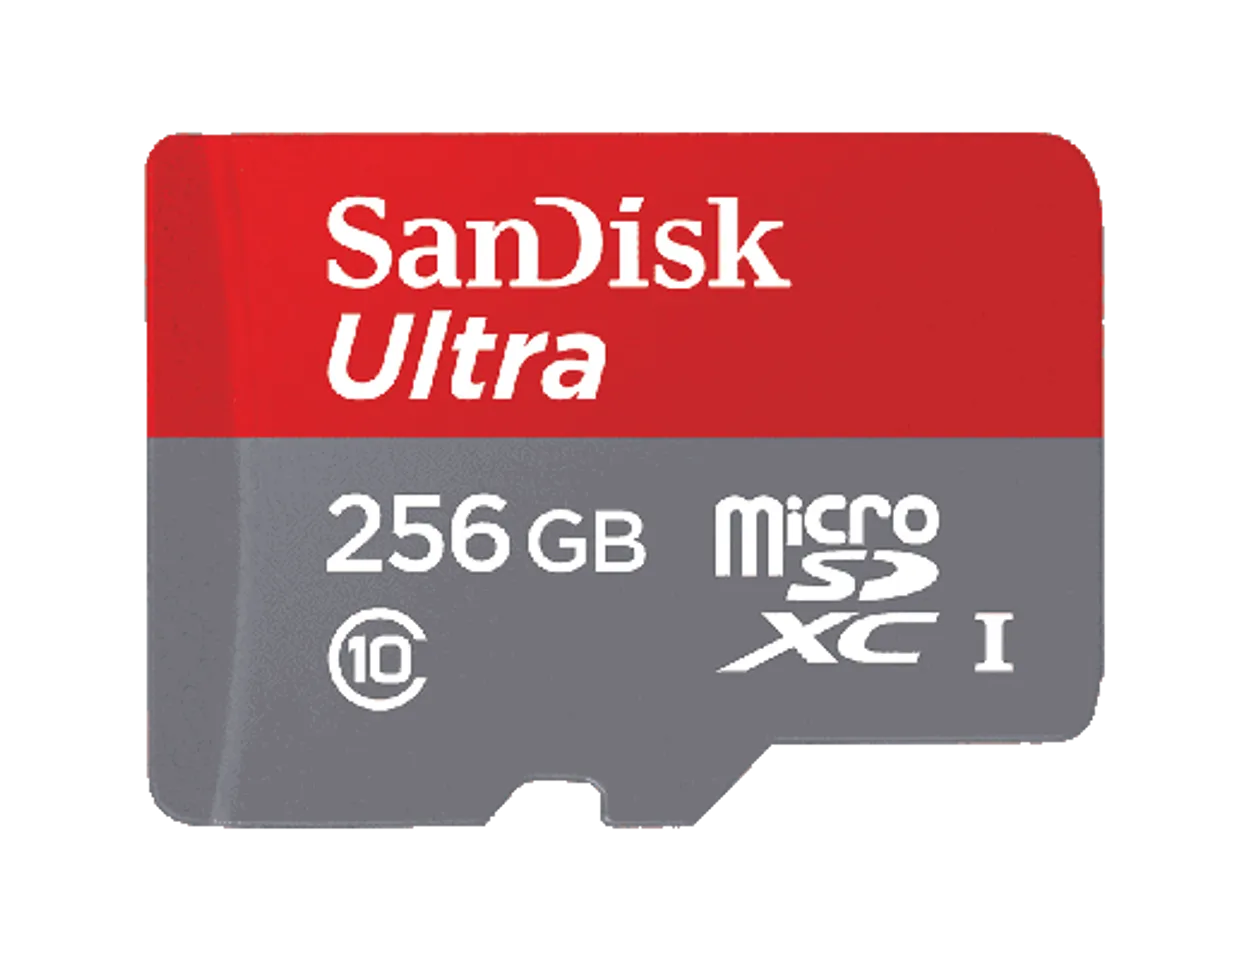 SanDisk Moved a Step Ahead from its competitors with World’s First A1 SD Specification microSD Card